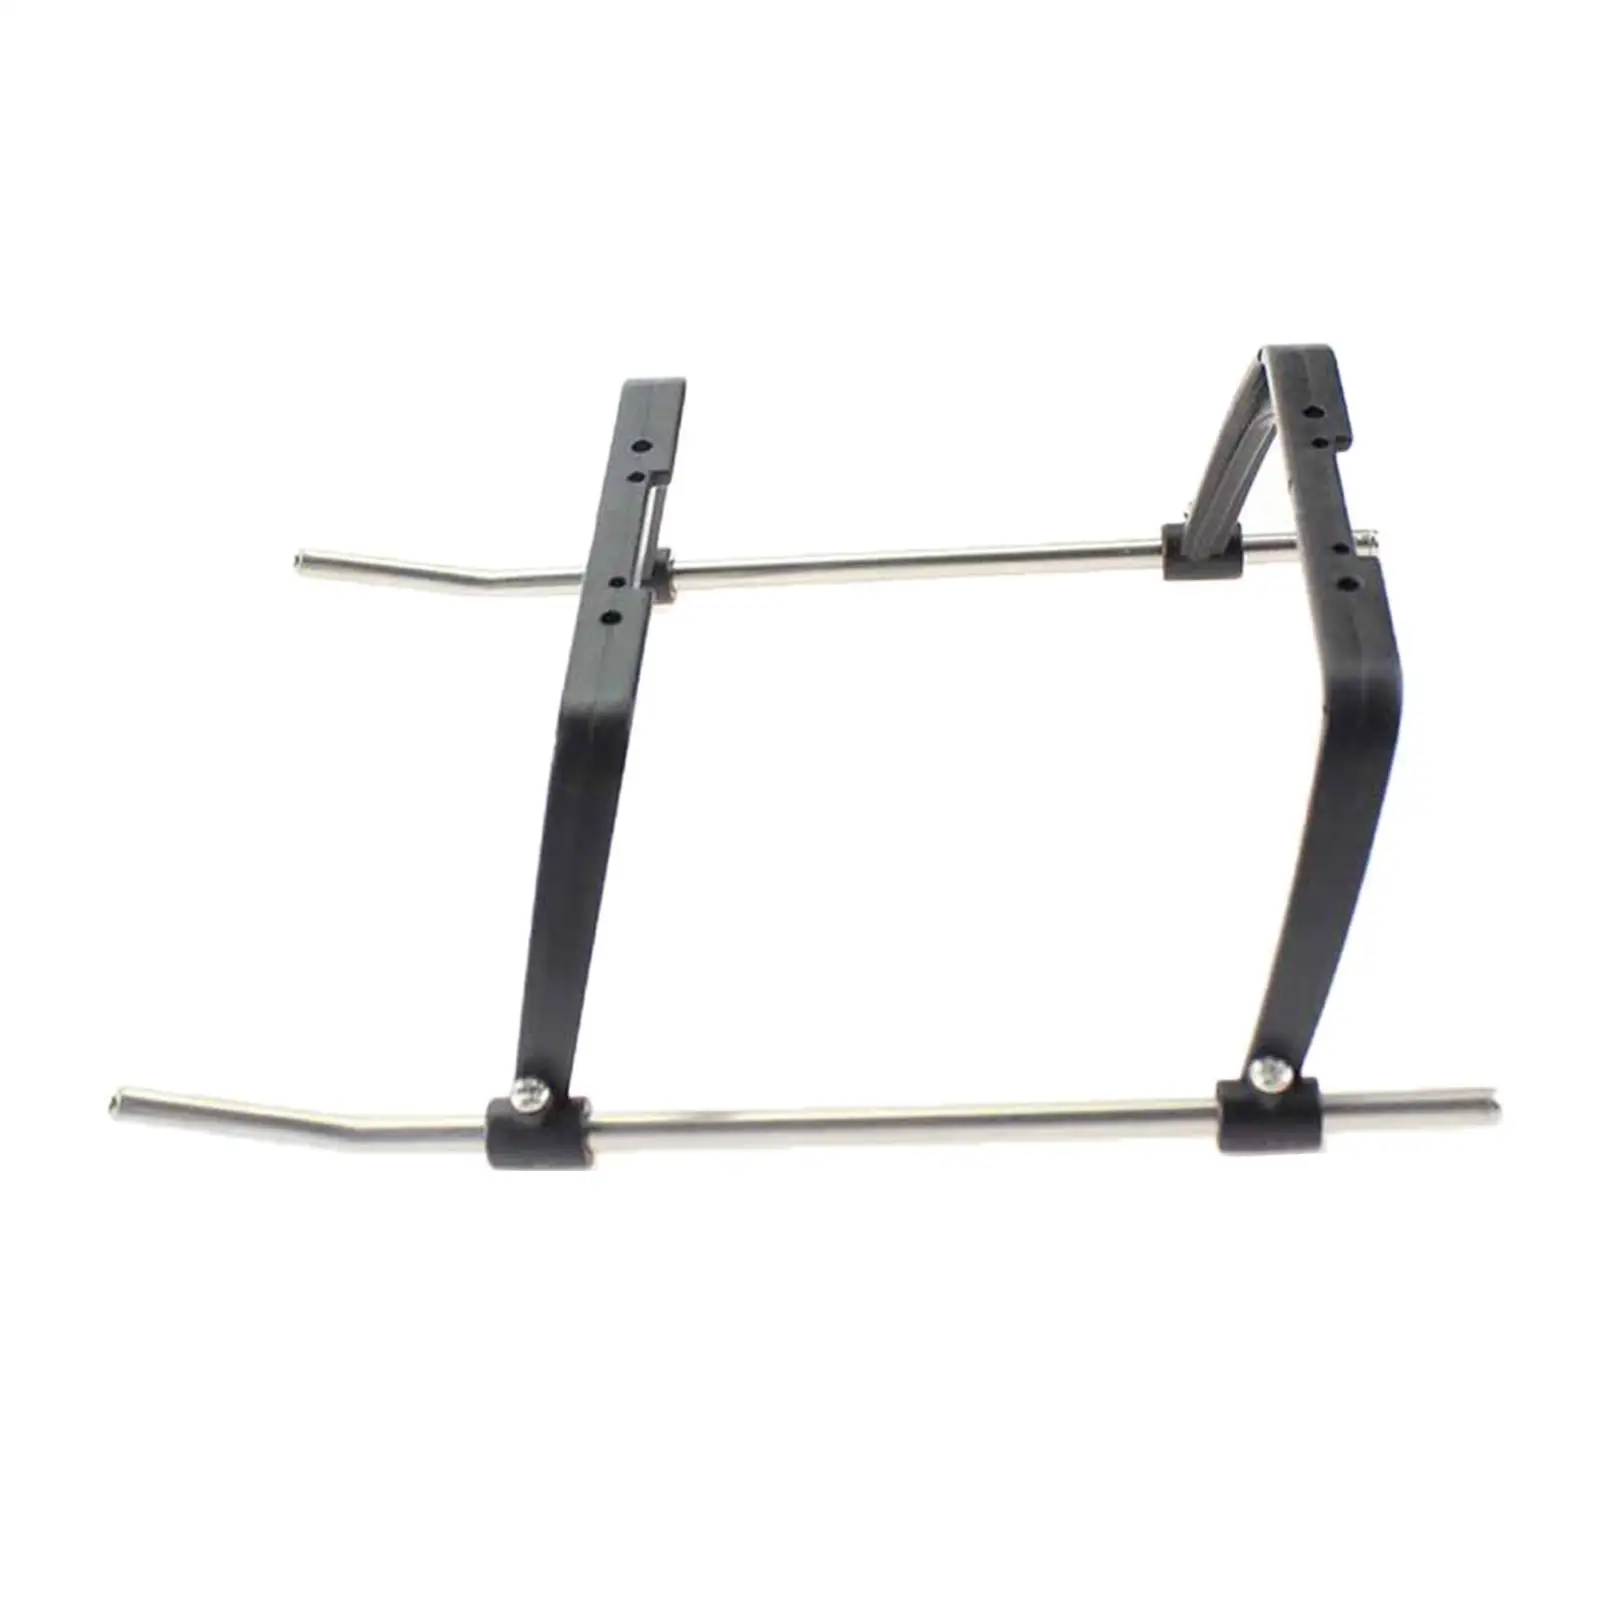 Portable Landing Gear Extensions Heightened Extended Long Leg Landing Legs Protection Bracket for V912-diy Accessories